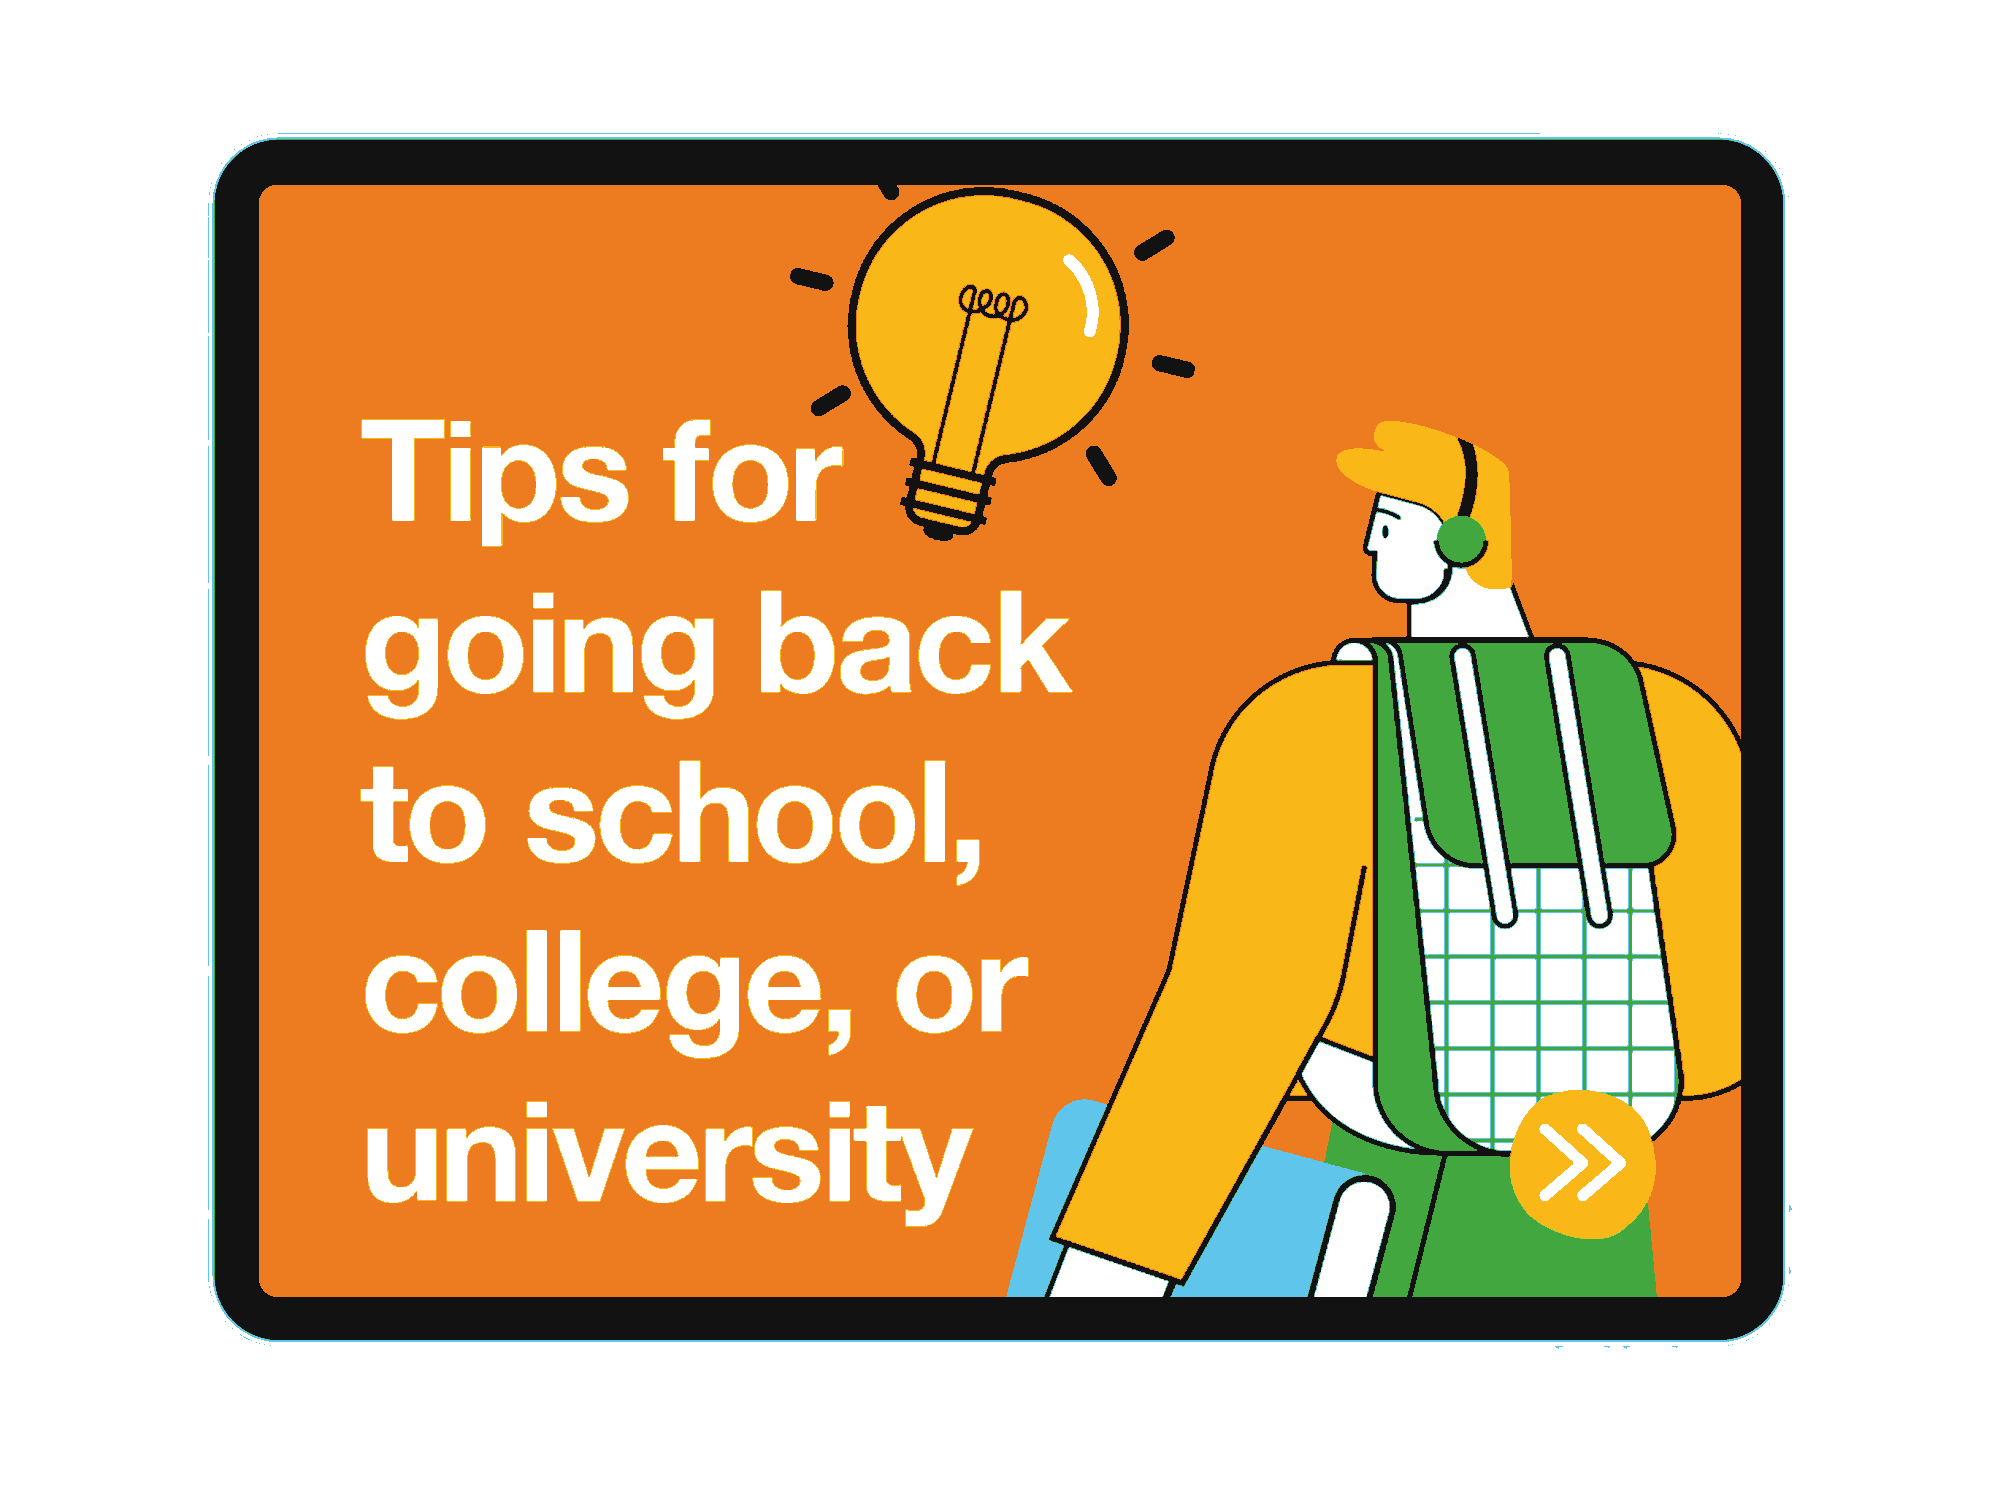 Ambitions about autism tips for going back to school, college or university